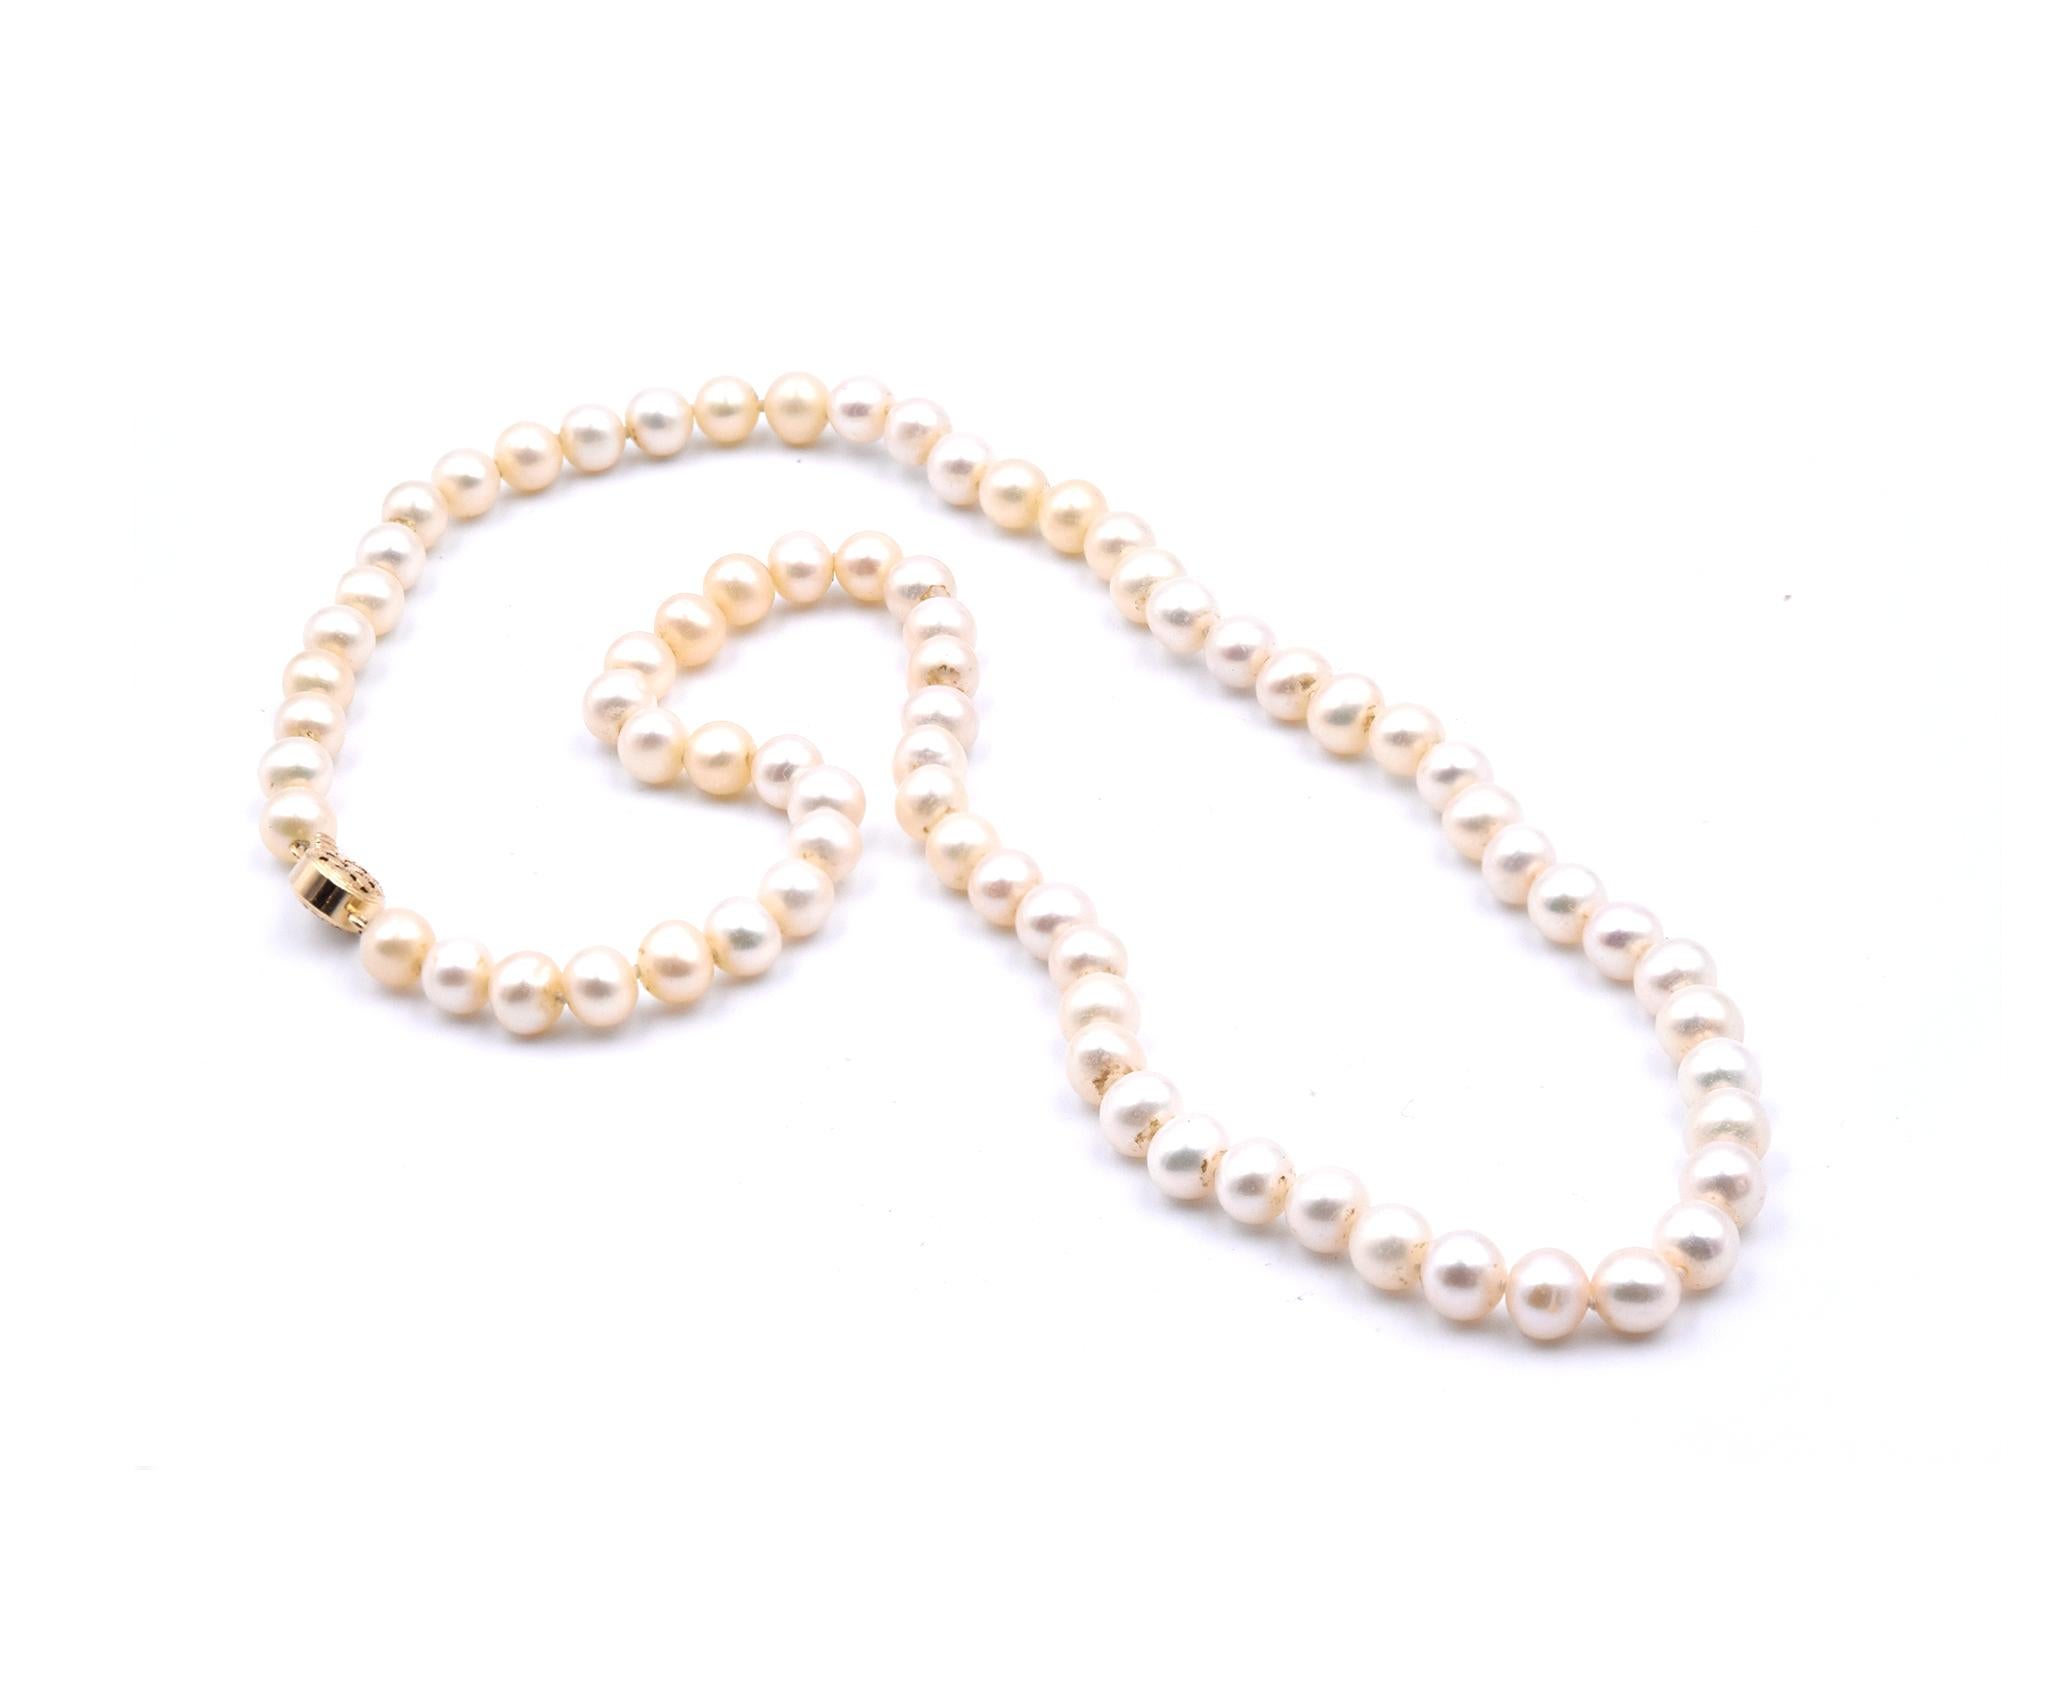 Designer: Custom
Material: 14K yellow gold
Pearl: 5.5-6mm semi round ivory pearls
Dimensions: necklace measures 16-inches in length
Weight: 19.96 grams